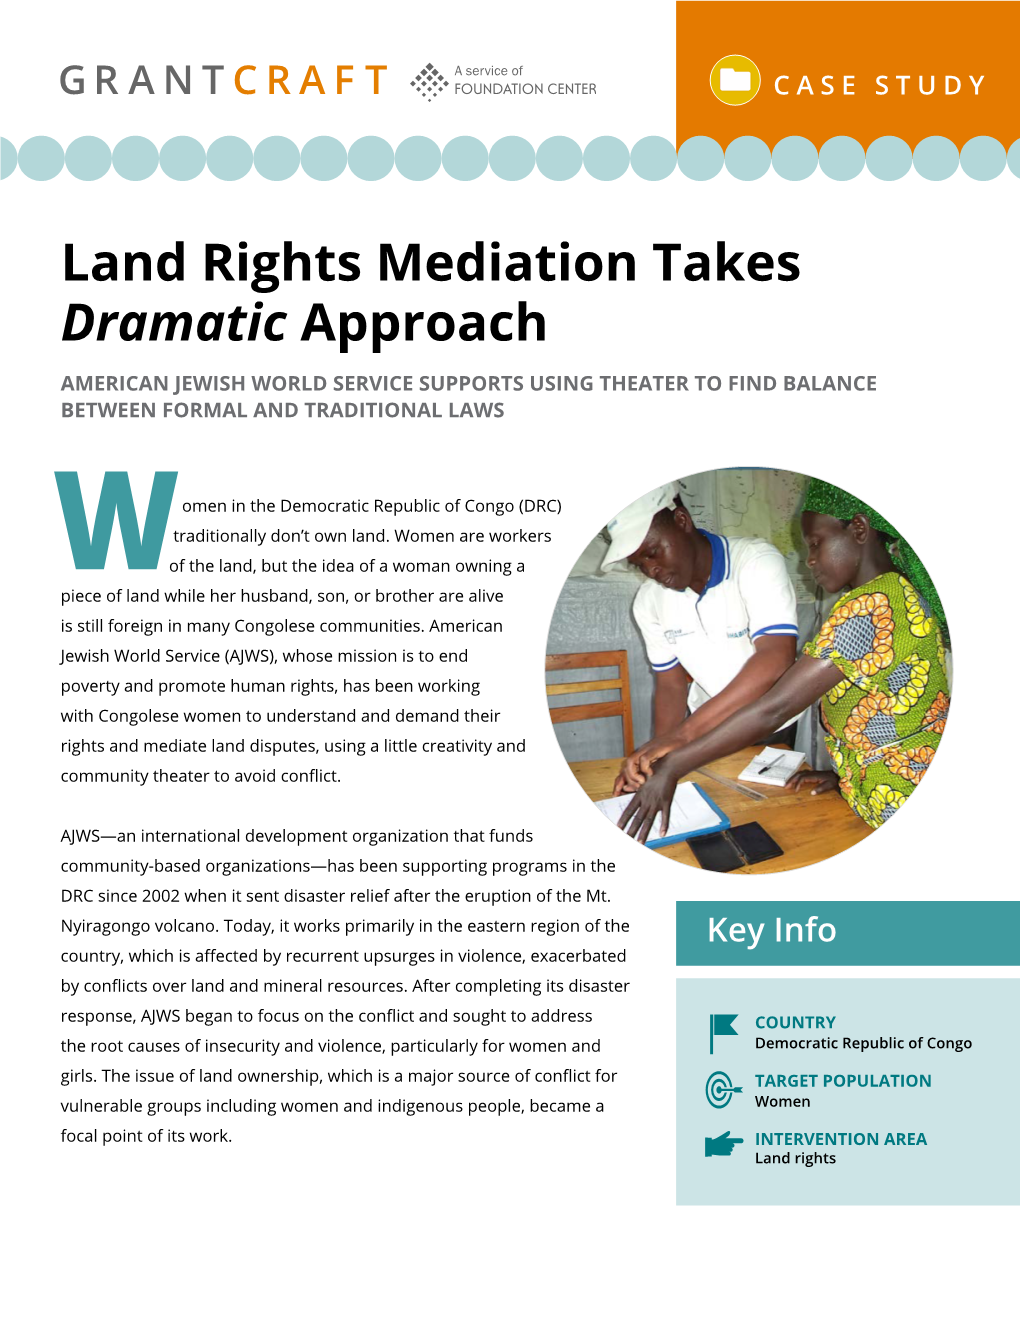 Land Rights Mediation Takes Dramatic Approach